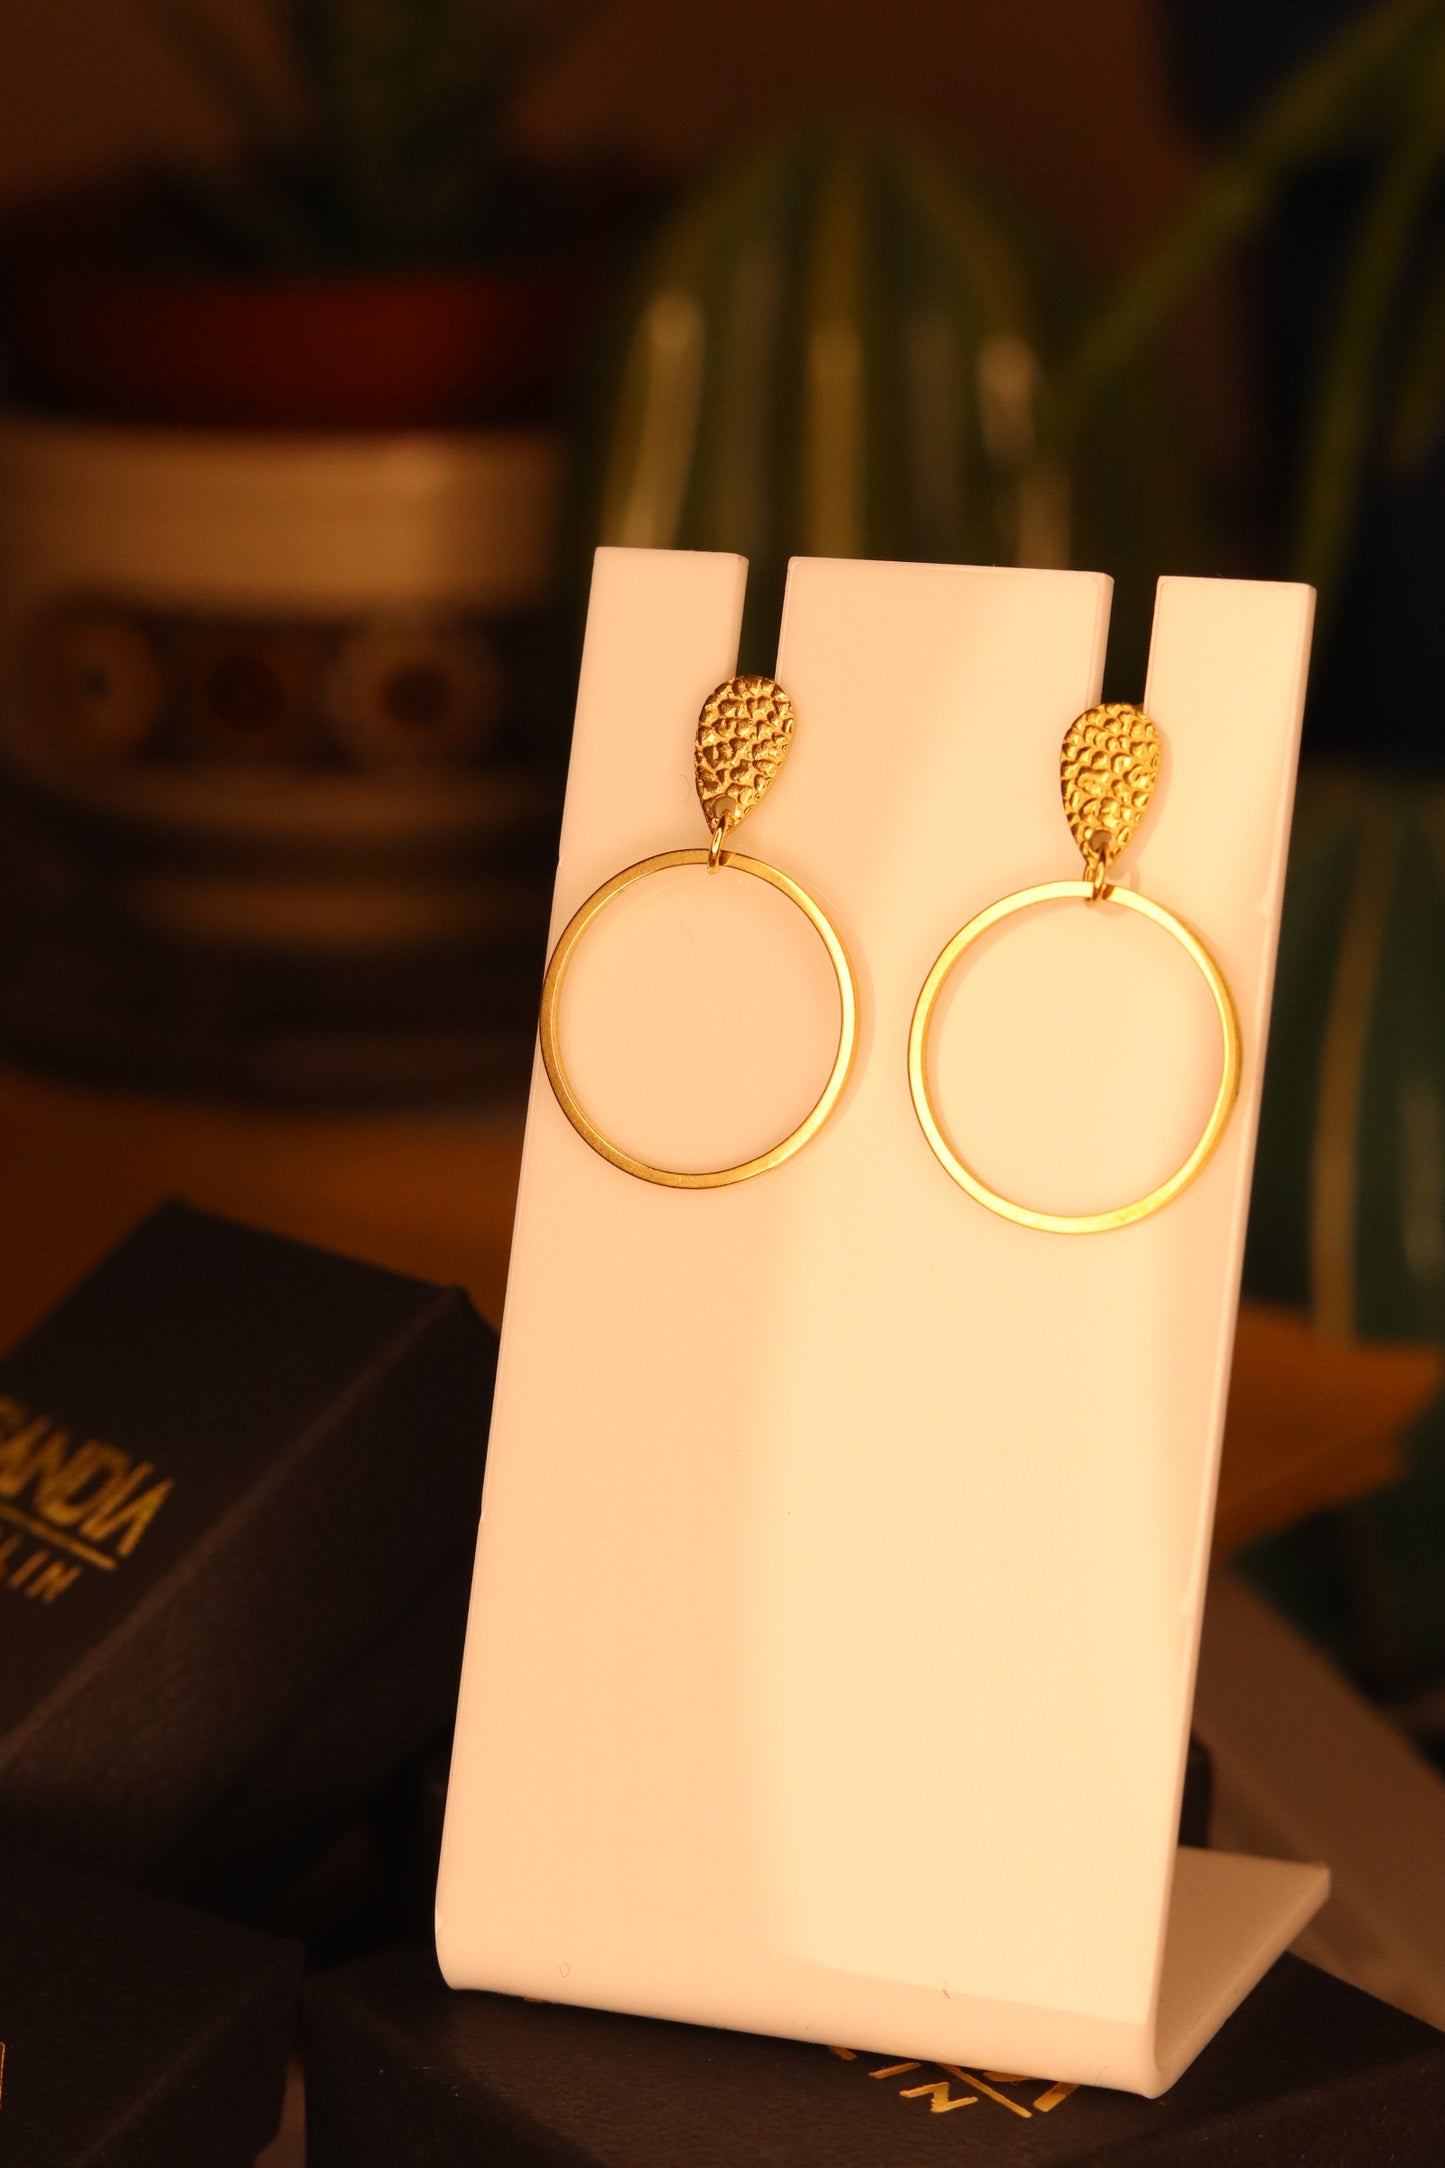 GOLD AROUND EARRINGS